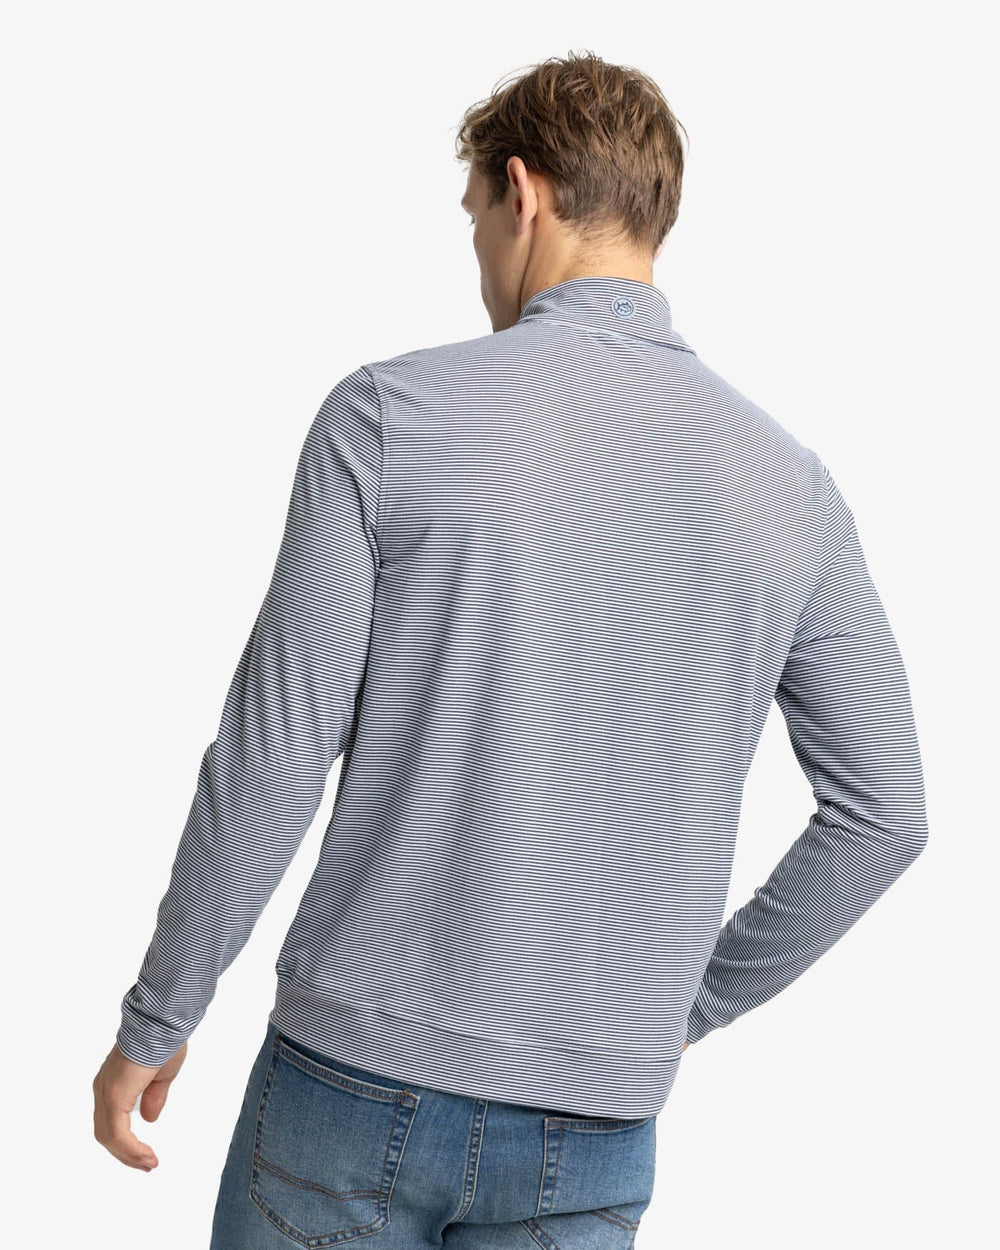 The back view of the Southern Tide Cruiser Micro-Stripe Heather Quarter Zip by Southern Tide - Heather Black